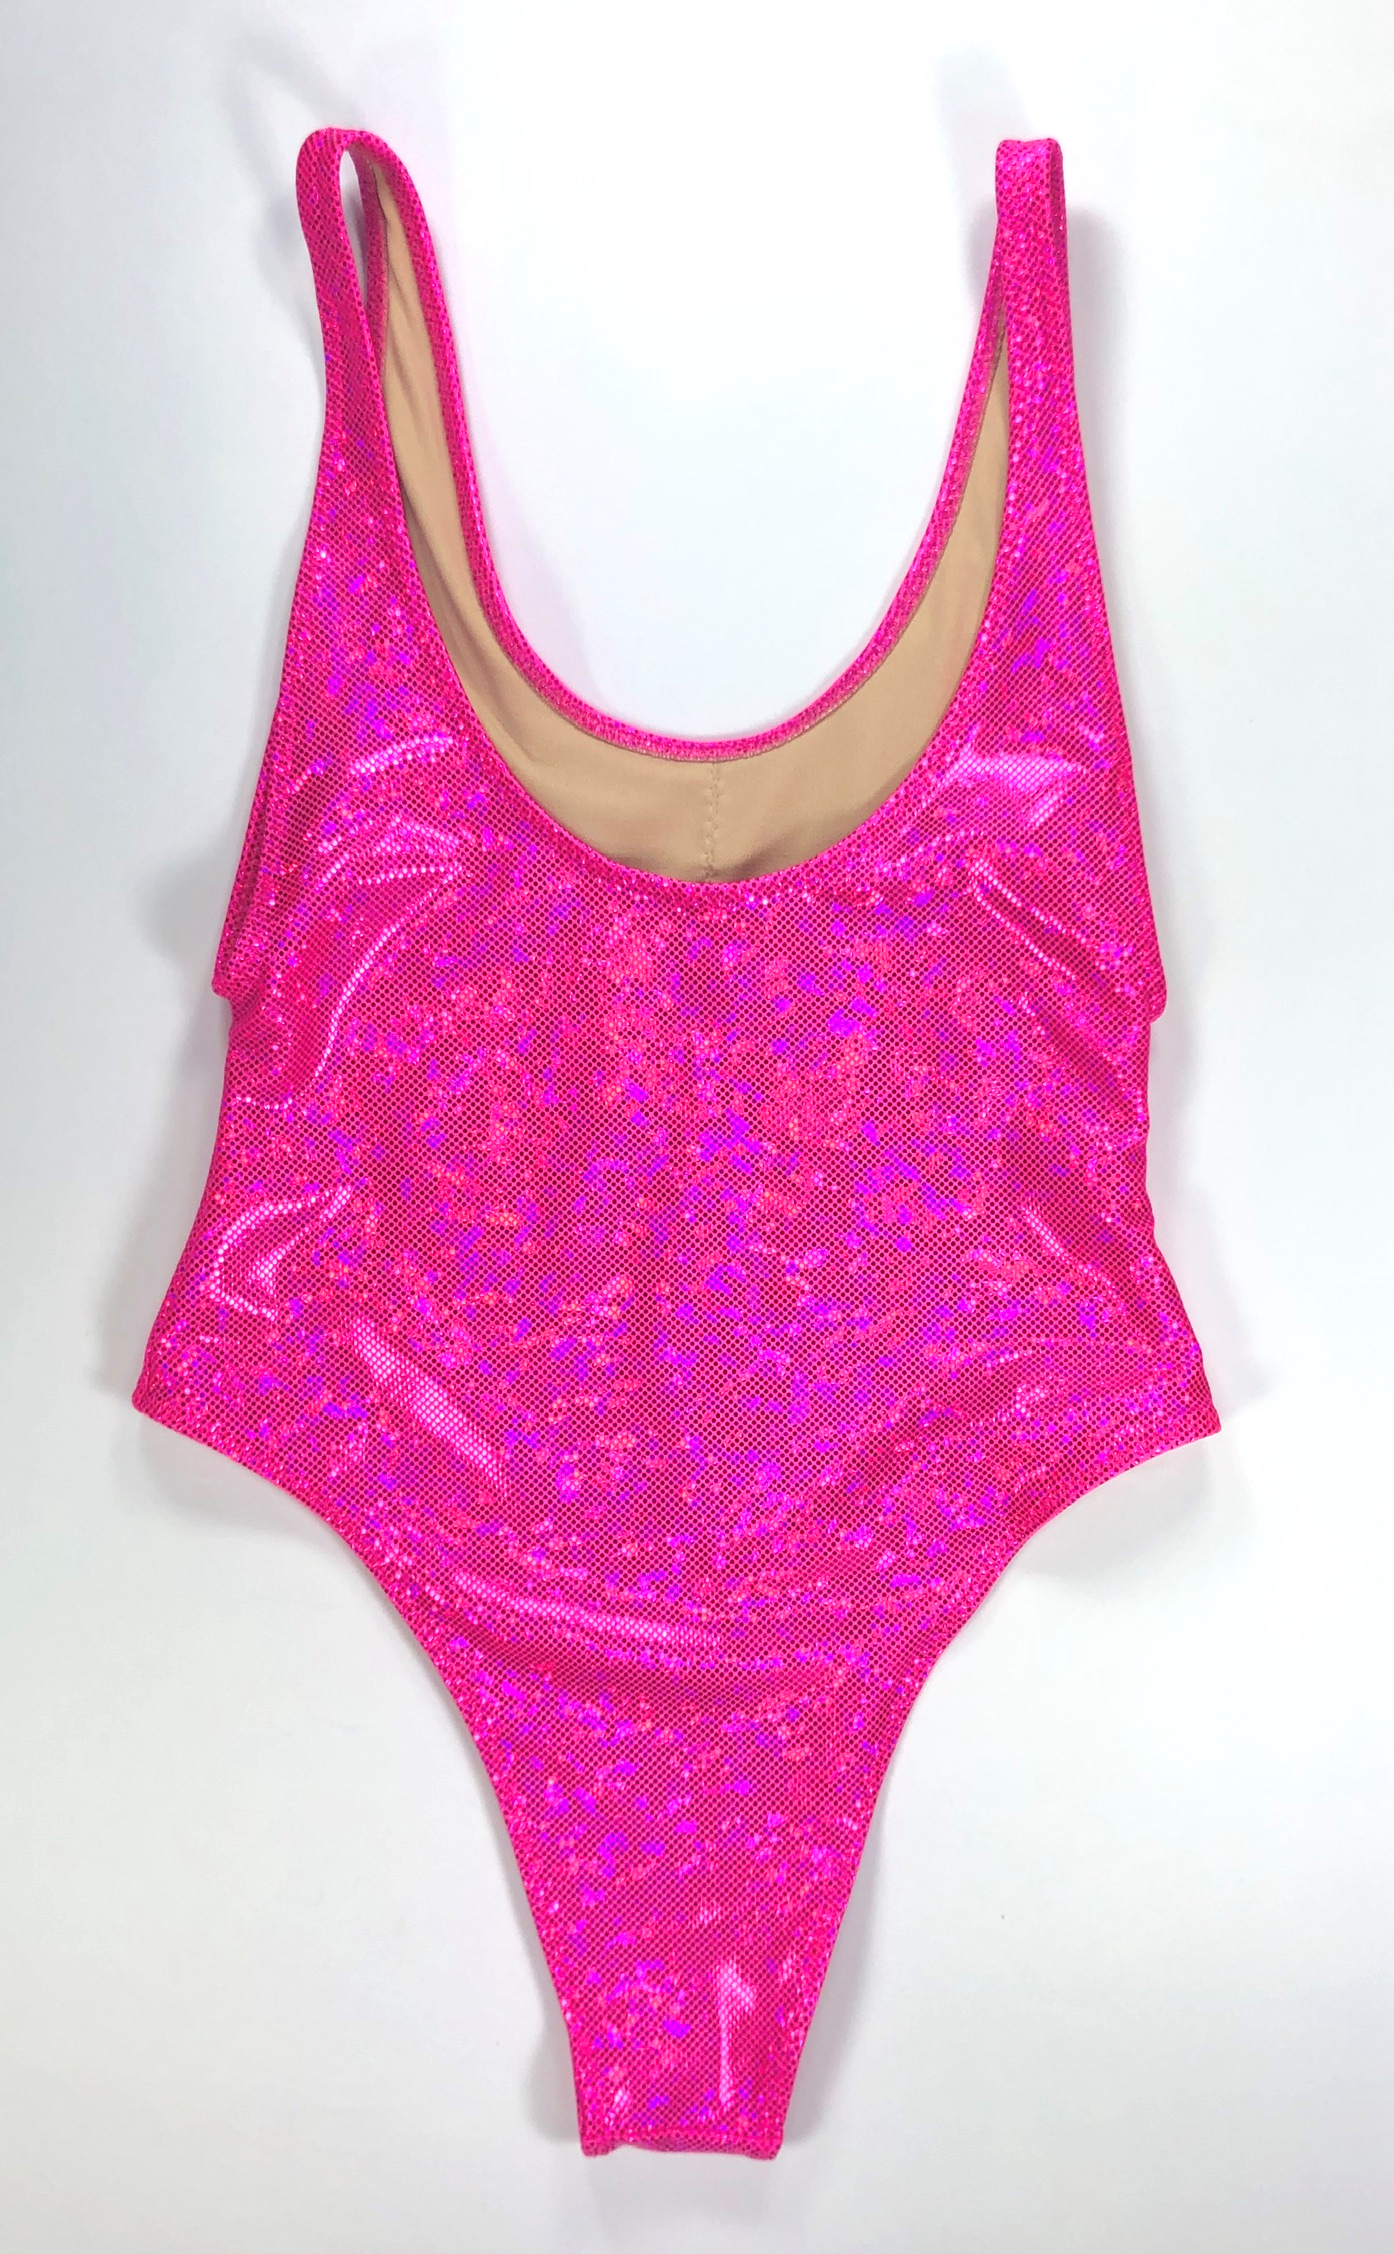 wendolin-designs - Wendolin Designs - Swimsuit - One Piece Swimsuit High Cut - Holographic Pink